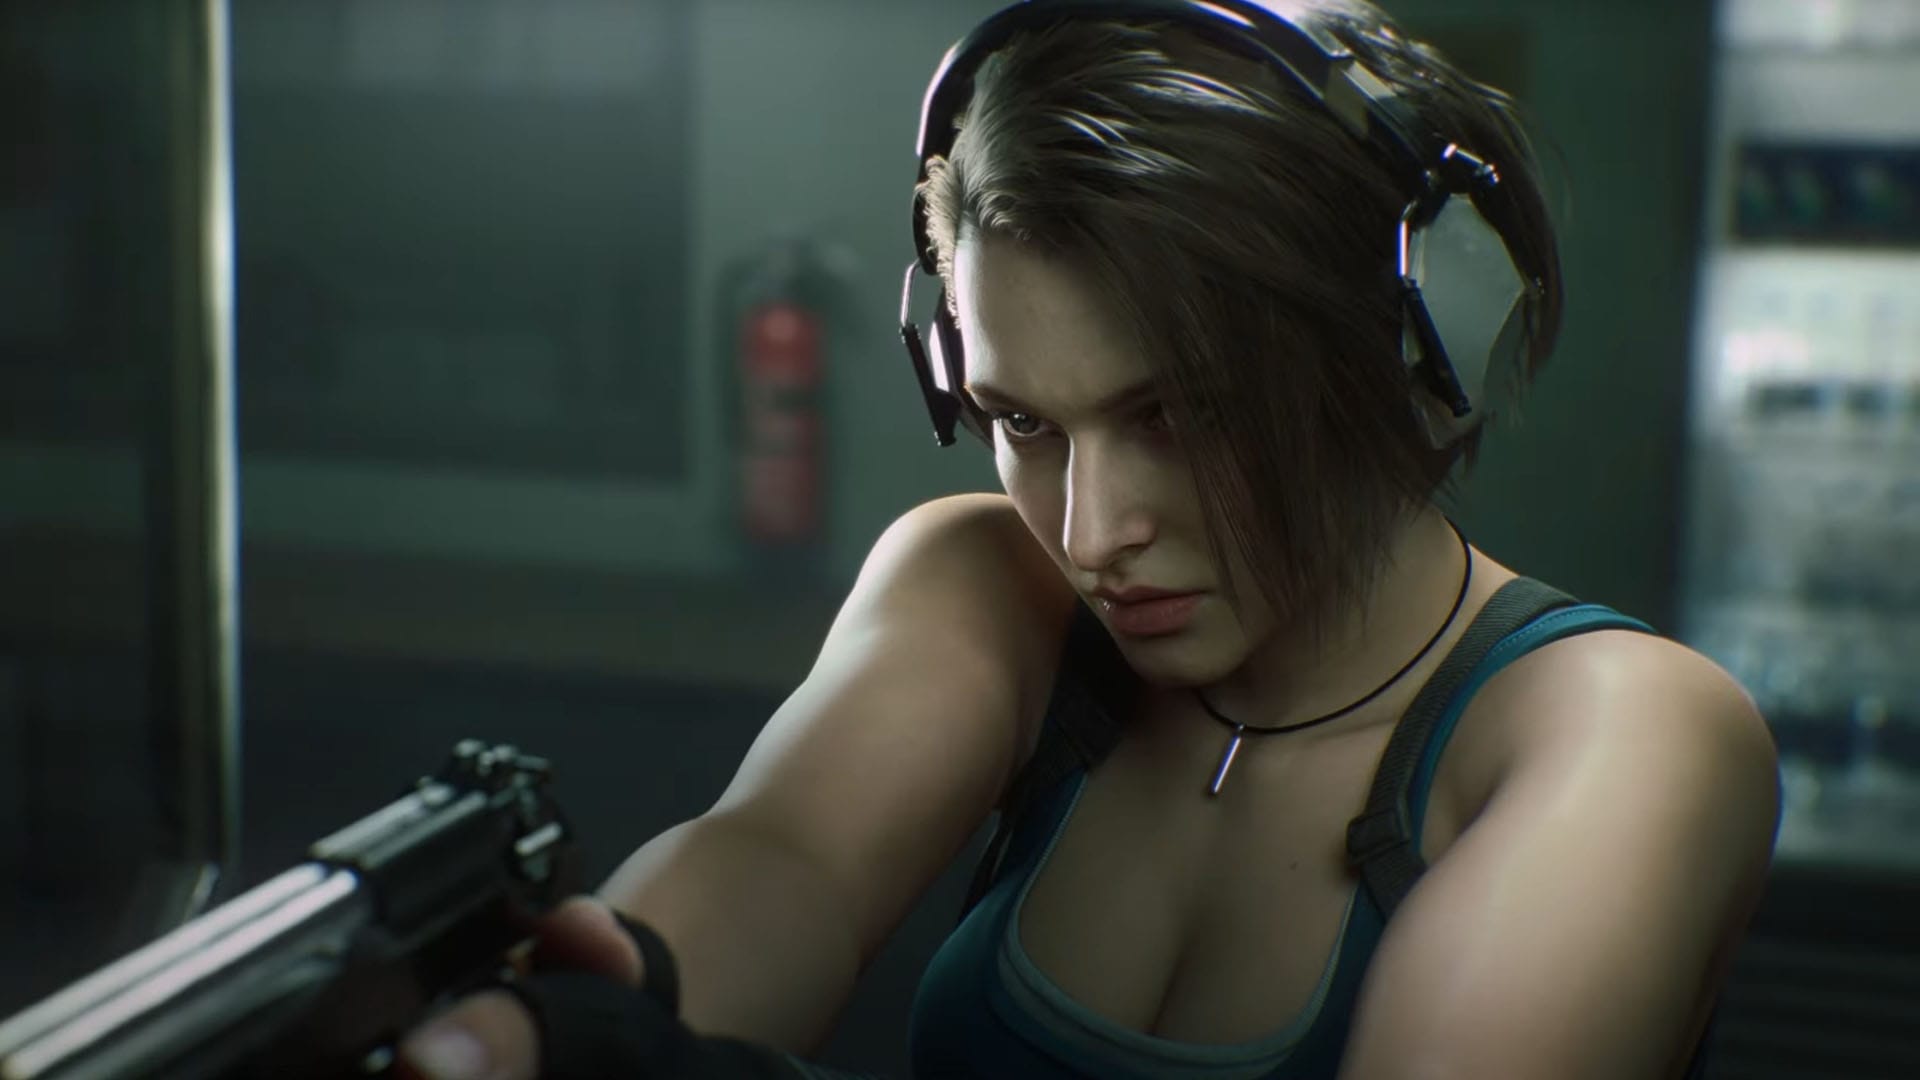 Resident Evil Death Island Launches This Summer, Will Feature Jill